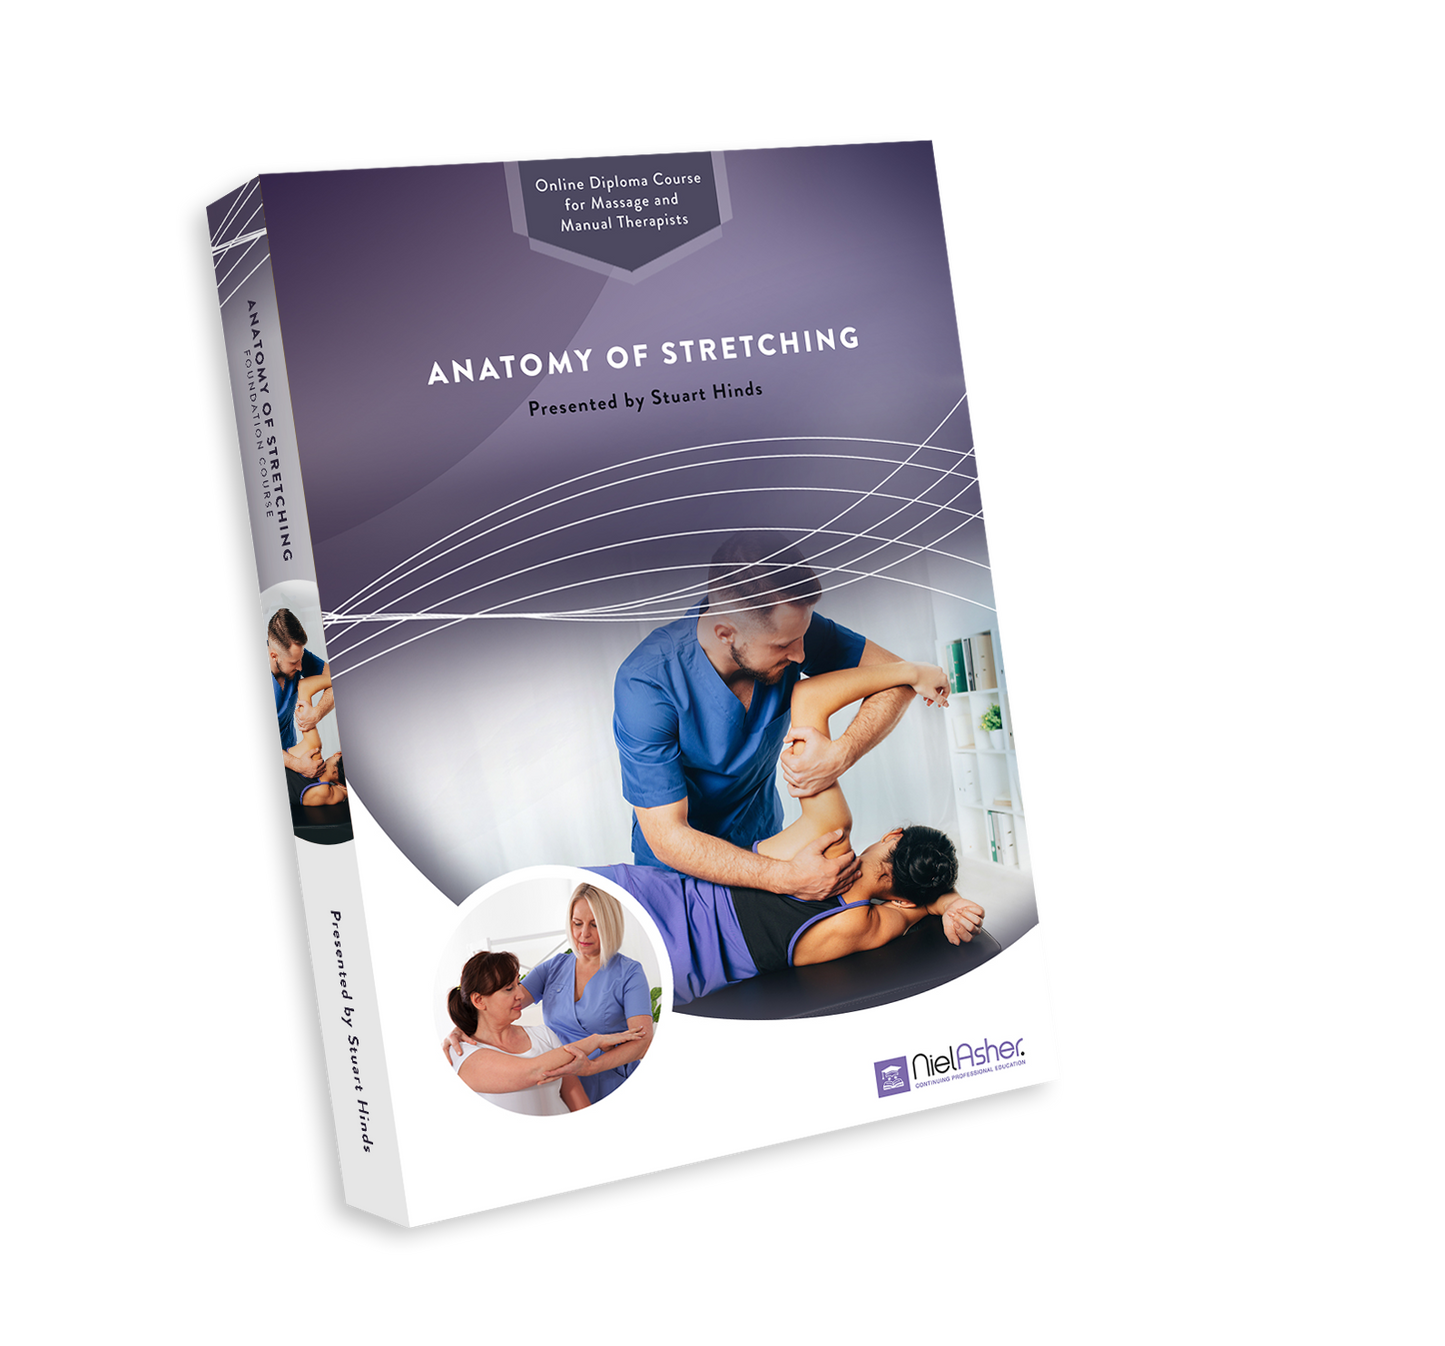 Anatomy of Stretching  - NAT Diploma Course (3.5 CEU's)